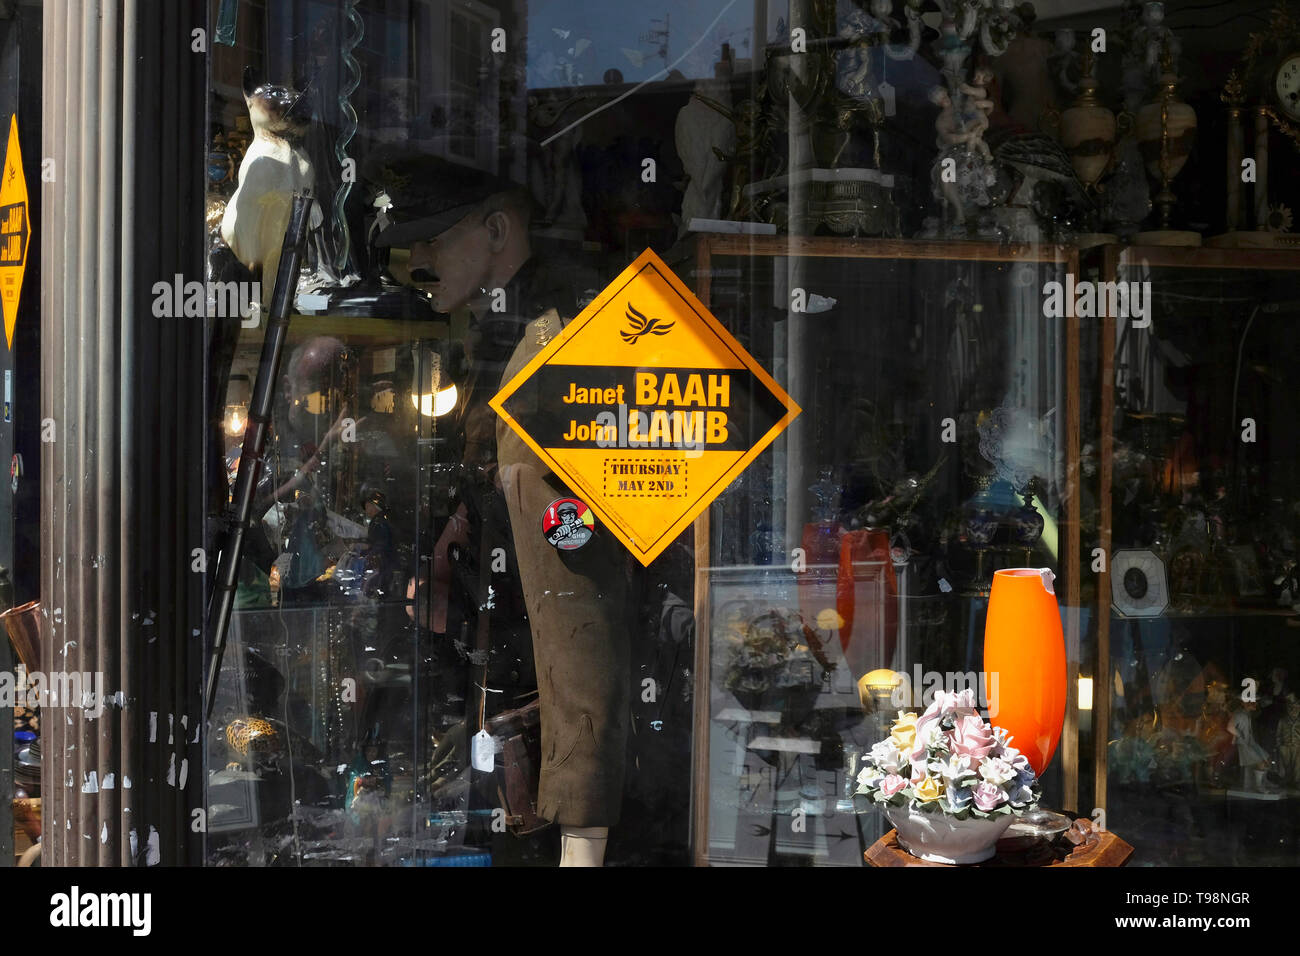 England, East Sussex, Lewes, Liberal Democrat election poster in shop window, Janet Baah and John Lamb, 2nd May 2019. Stock Photo